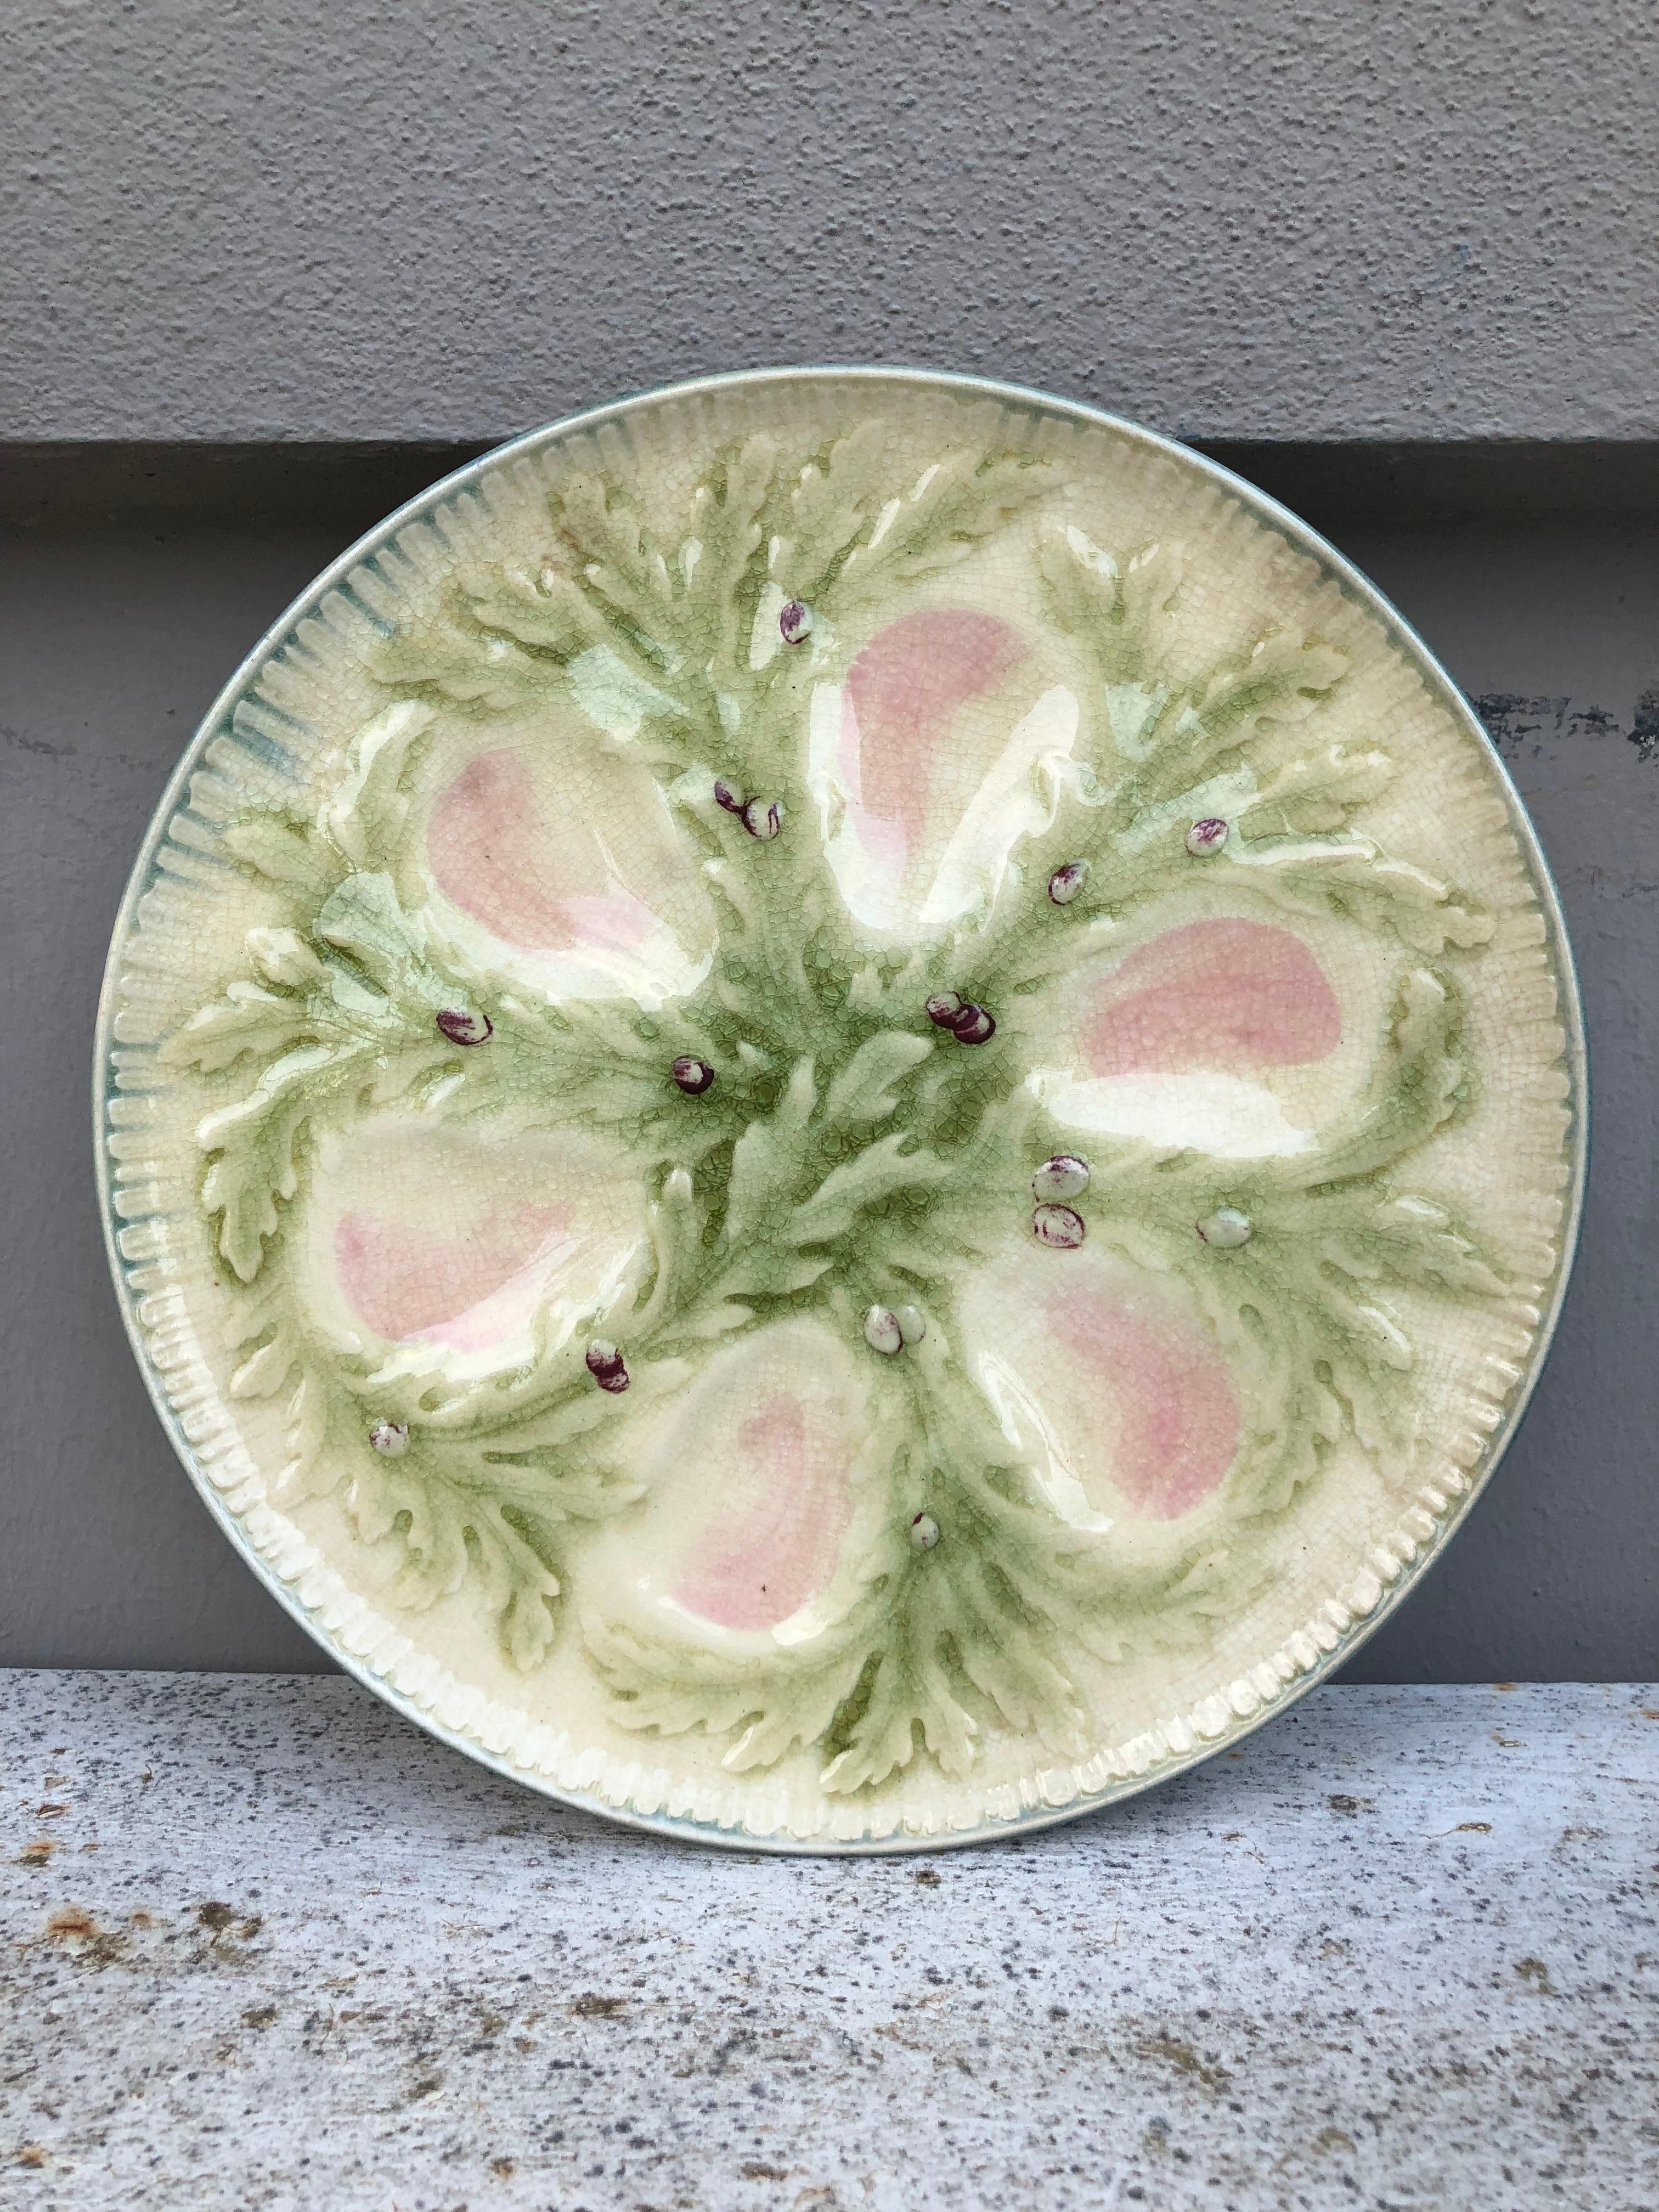 French Majolica oyster plate signed Hippolyte Boulenger Choisy-le-Roi. The six pink wells are surrounded by green seaweeds.